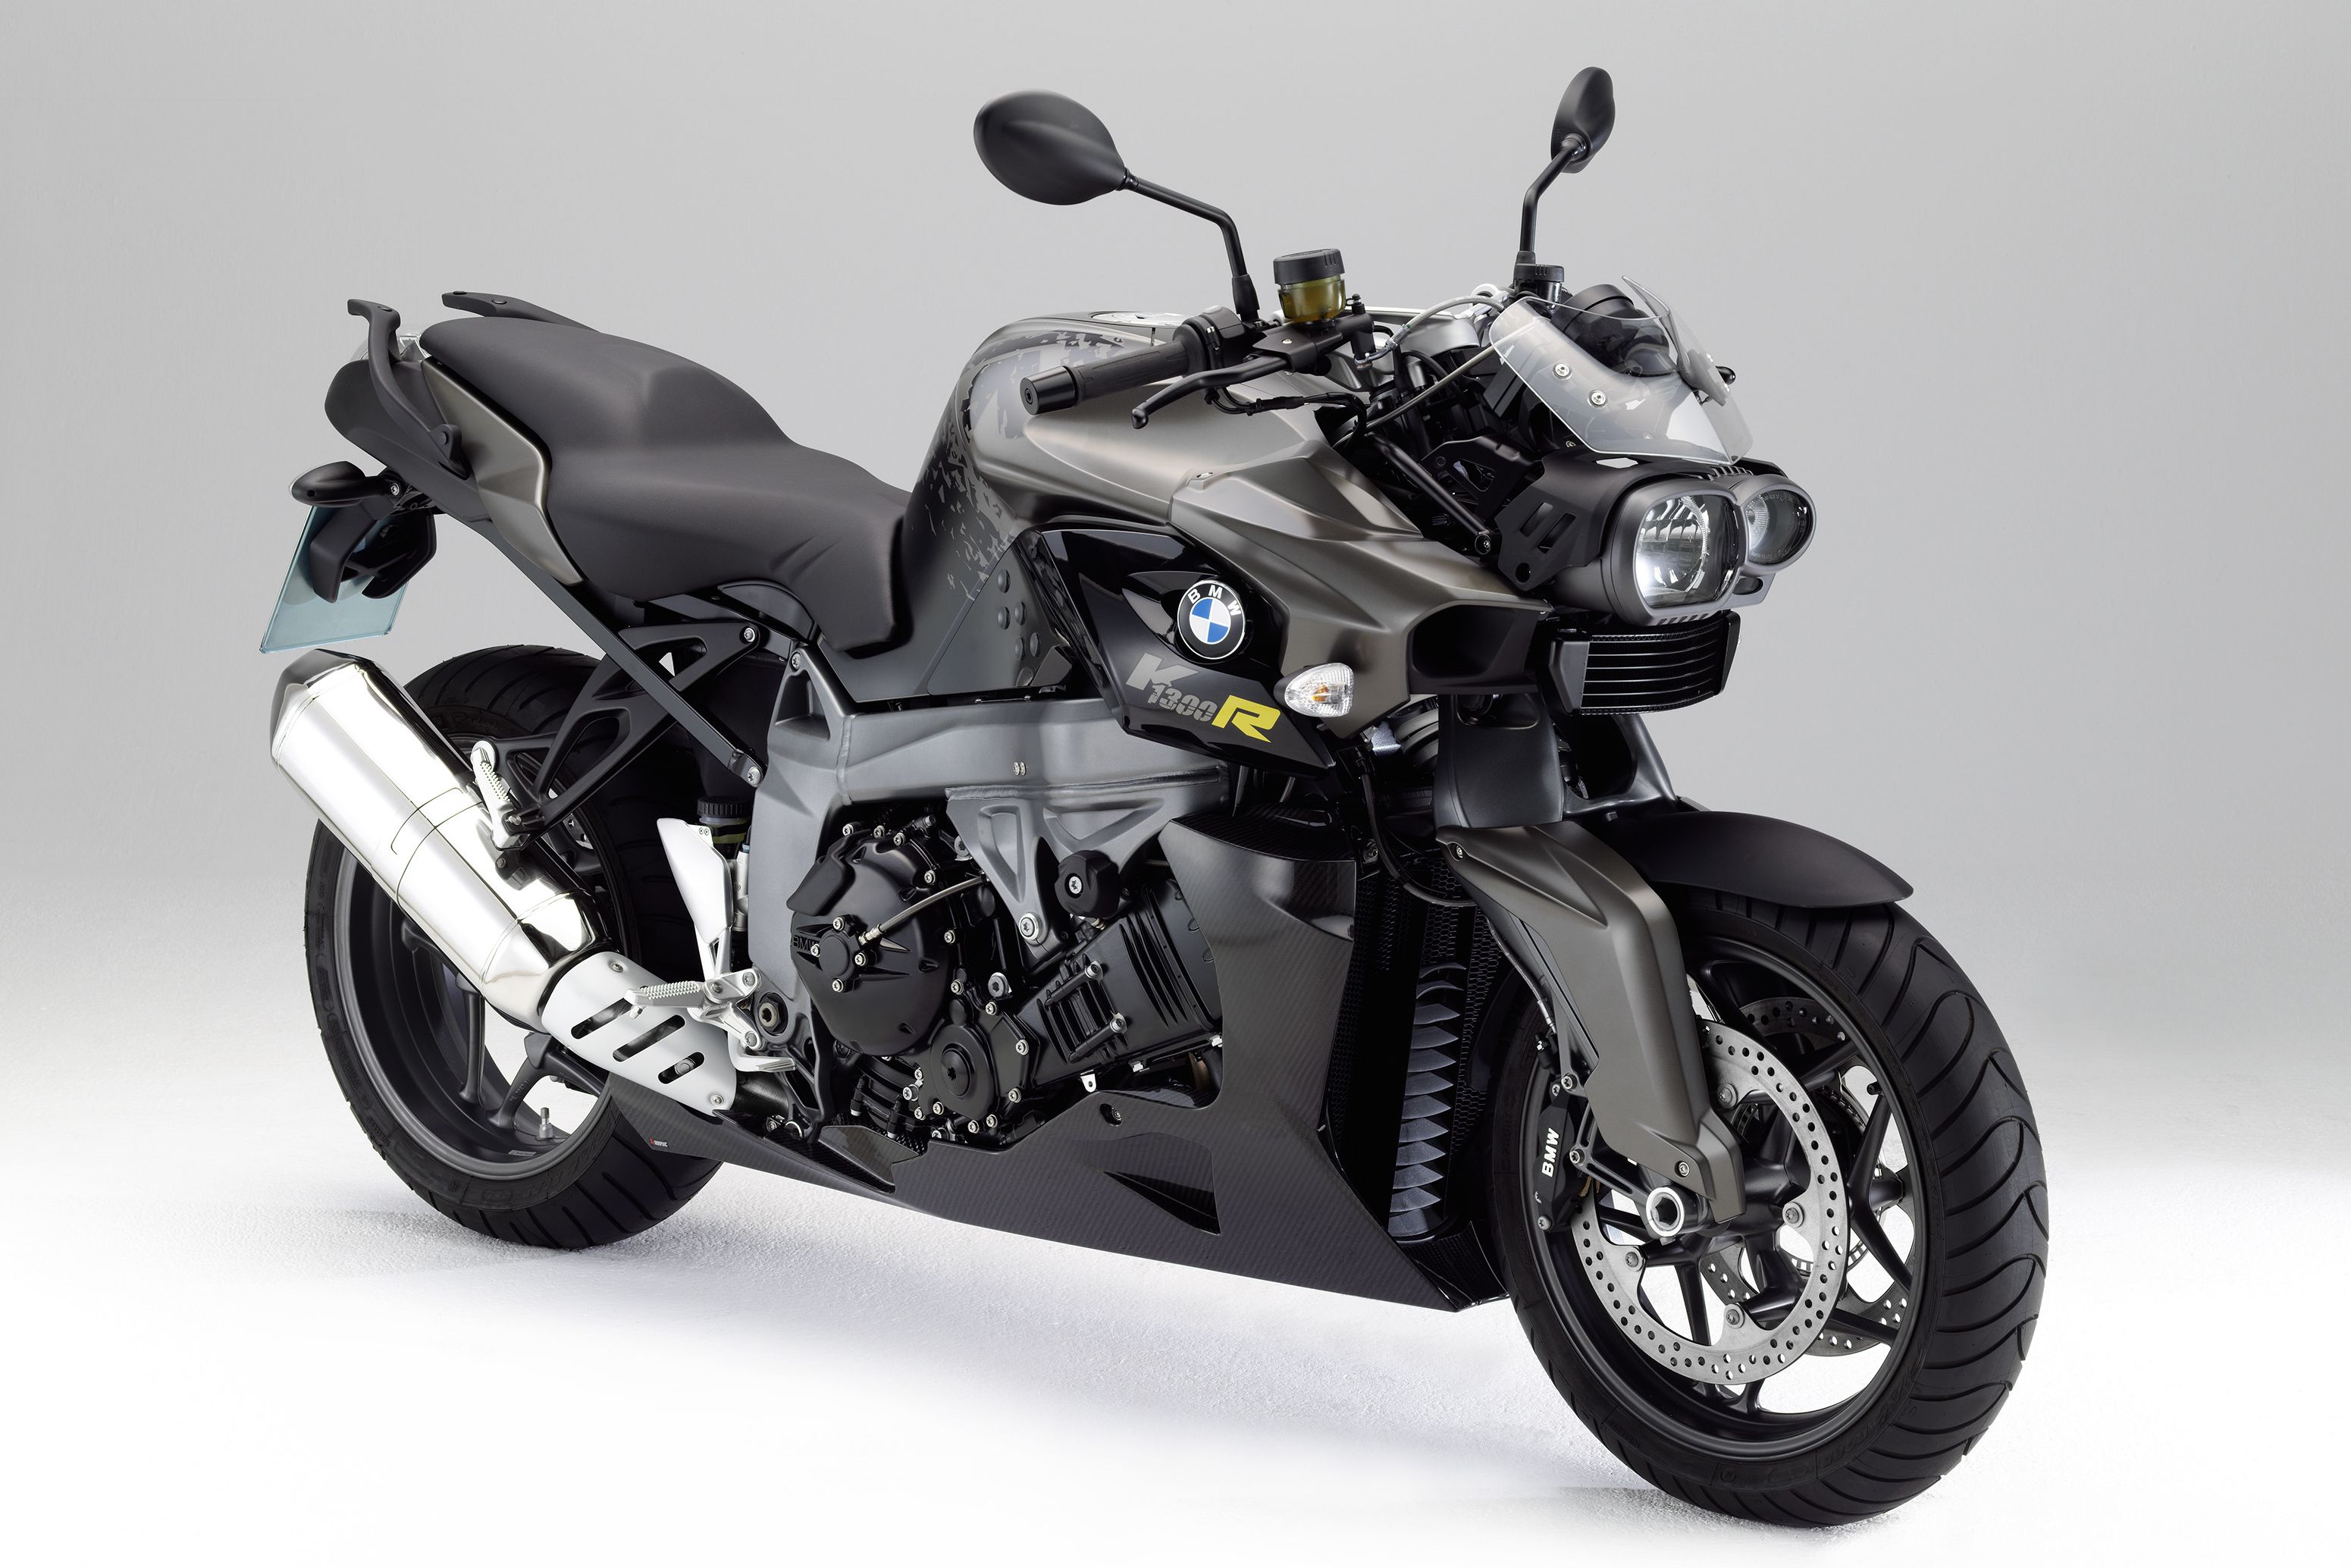 The new K 1300 R, the most powerful naked bike BMW has 